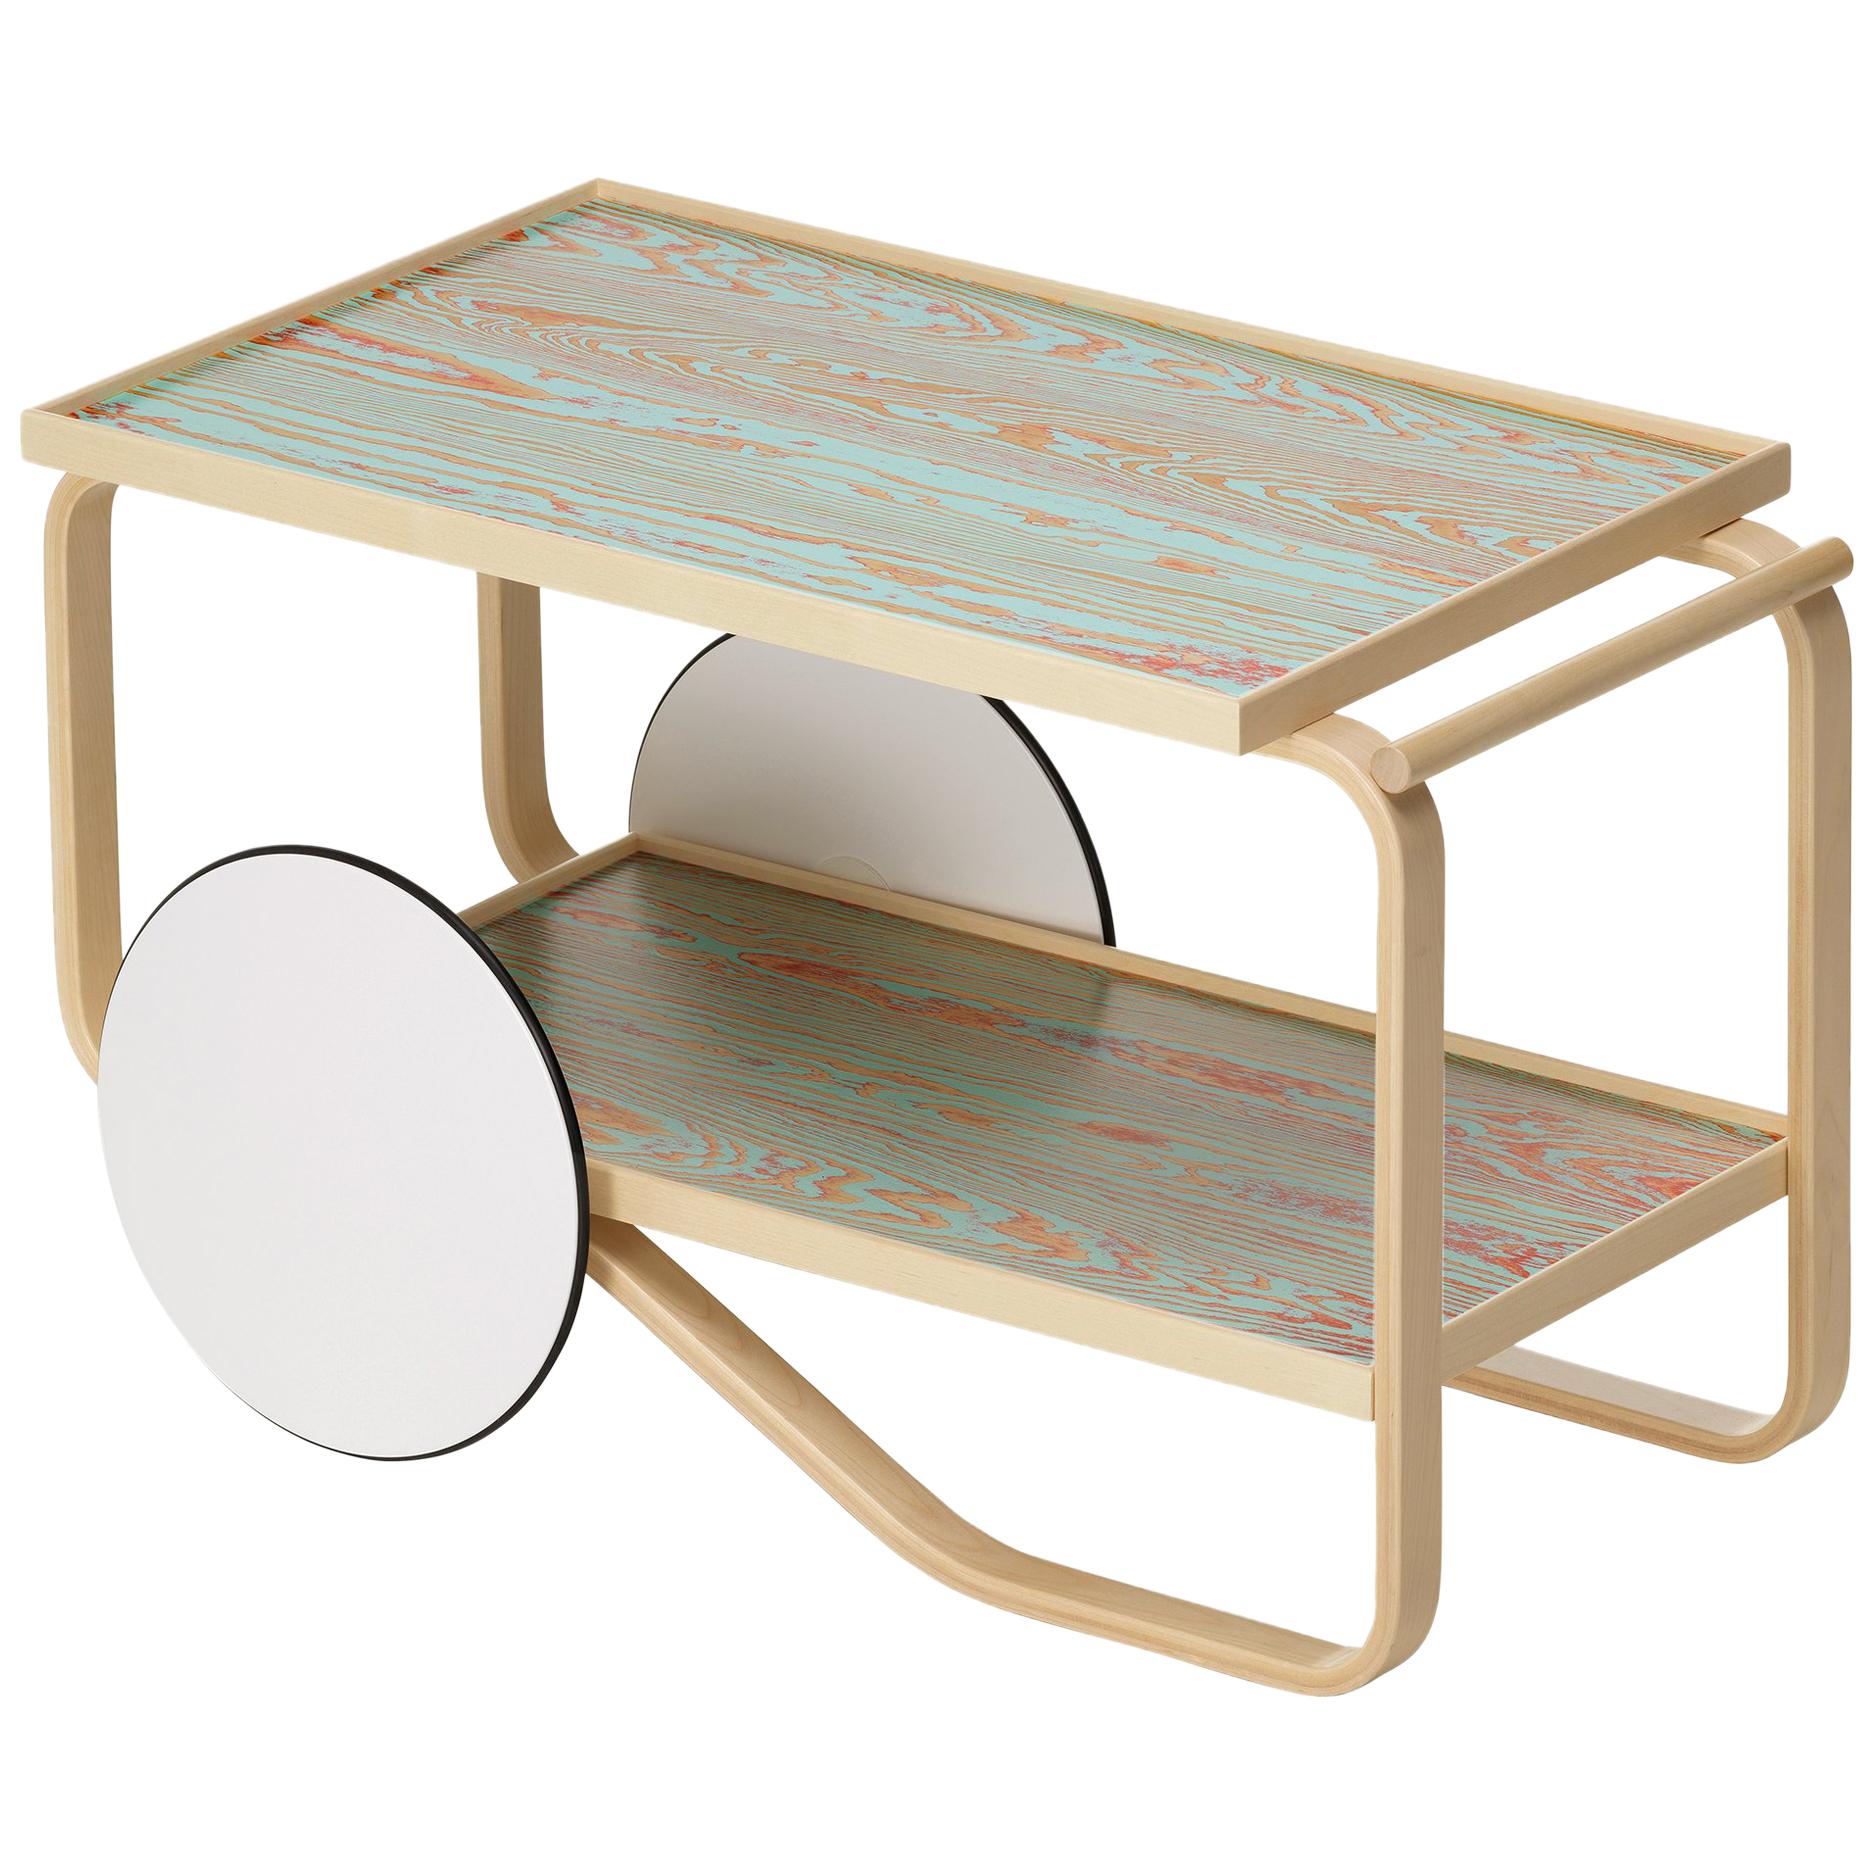 Artek Tea Trolley 901 ColoRing in Red & Turquoise by Alvar Aalto and Jo Nagasaka For Sale